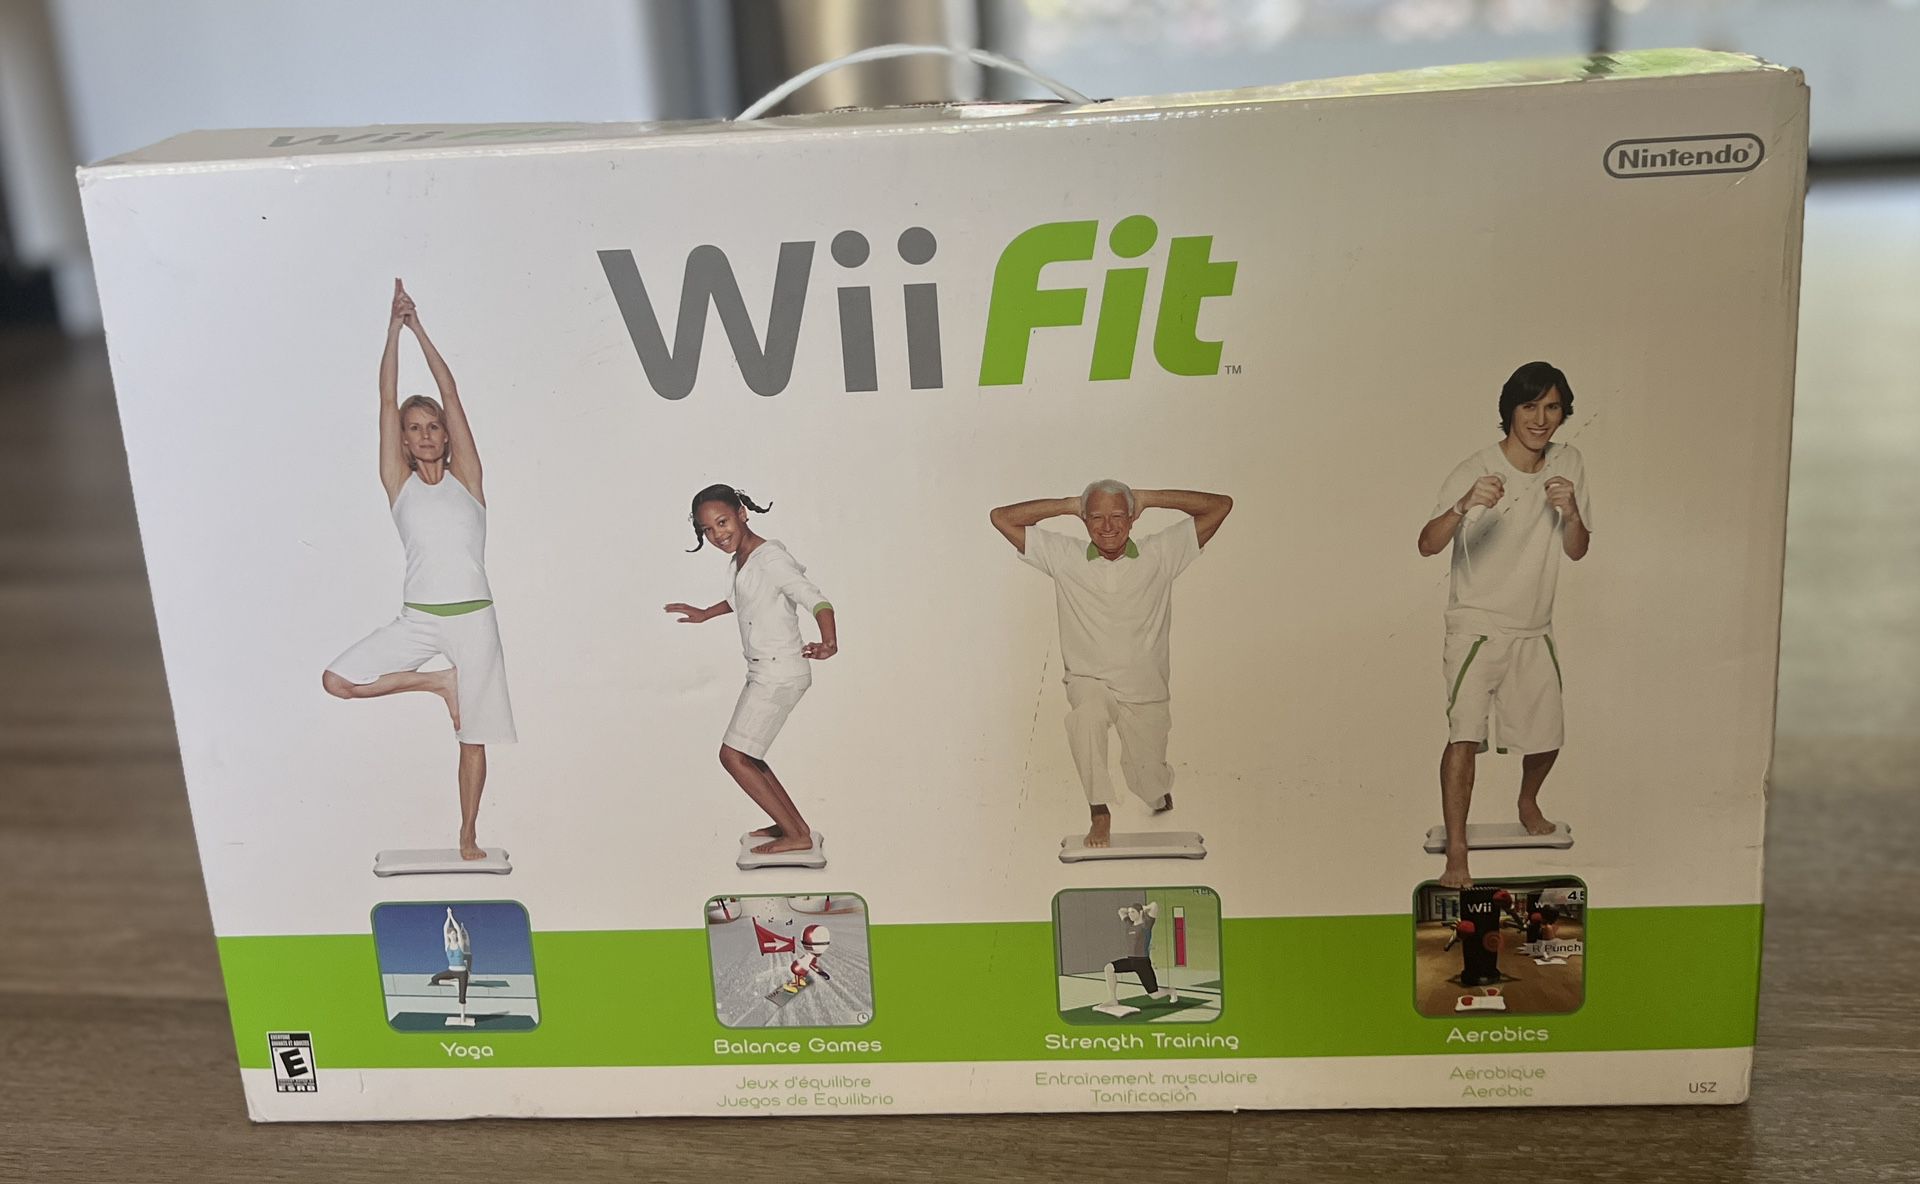 Brand New Sealed Nintendo Wii Fit Balance Board w/ Wii Fit Video Game Bundle